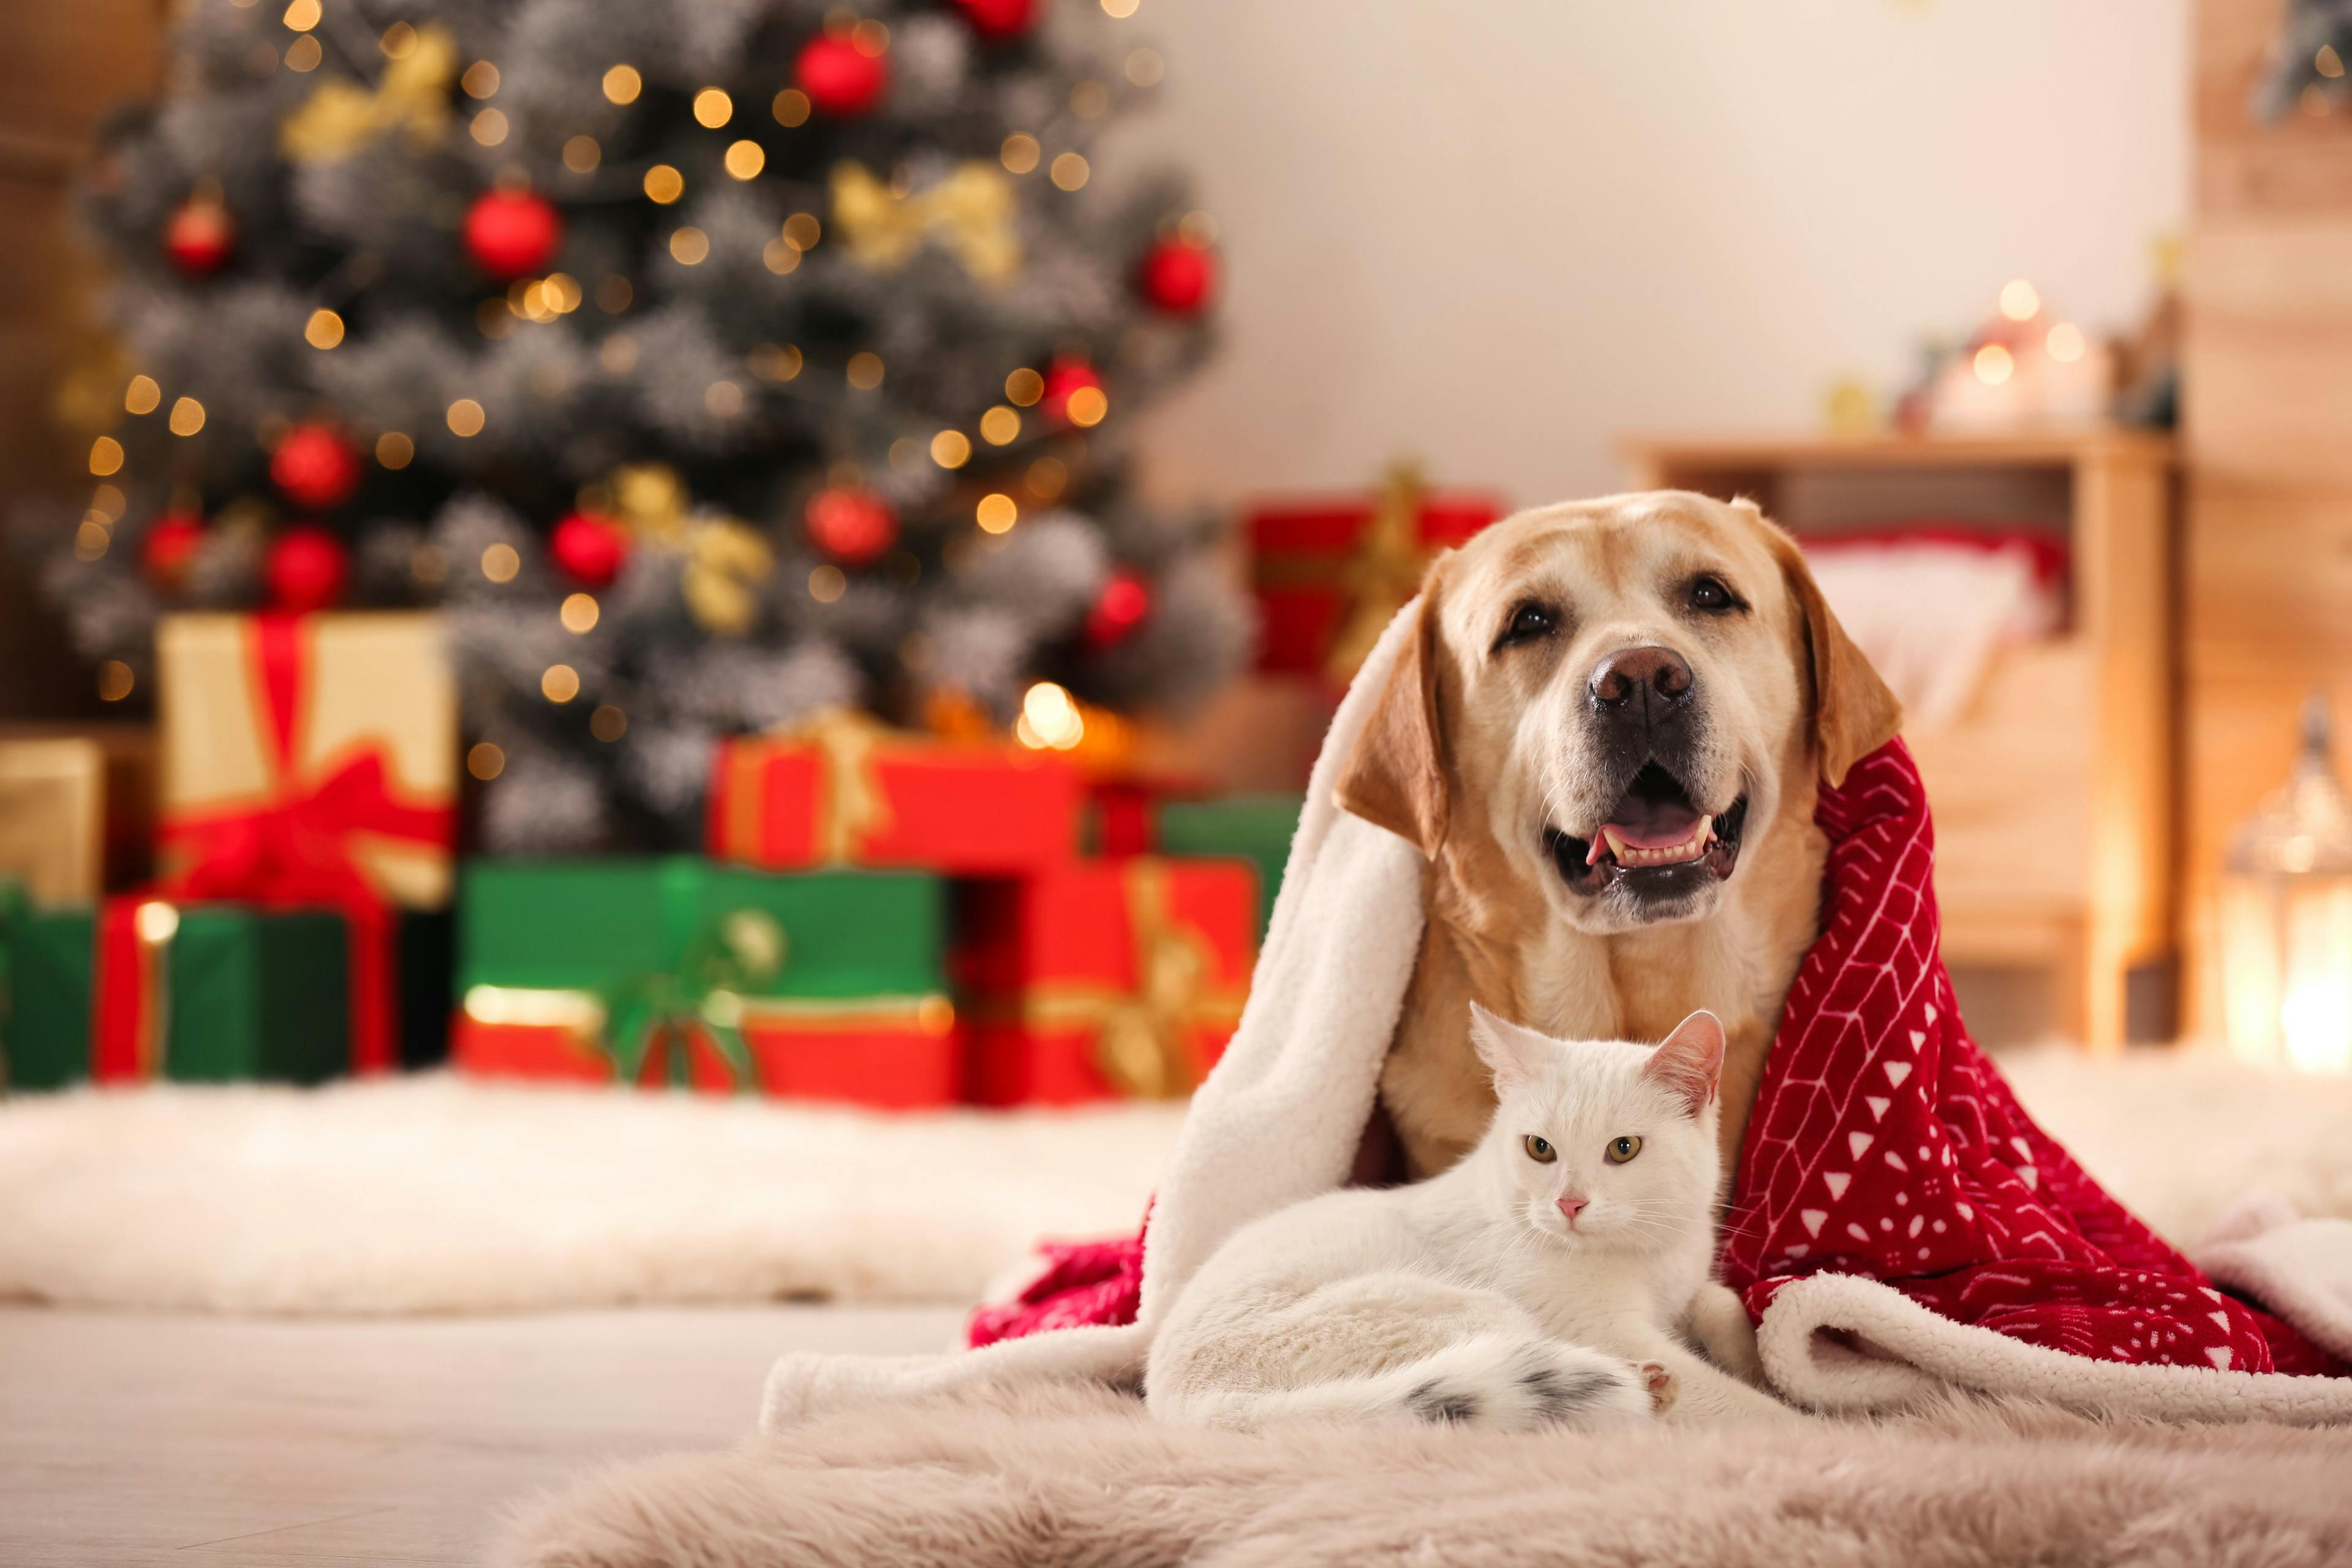 Keeping pets safe for the holidays